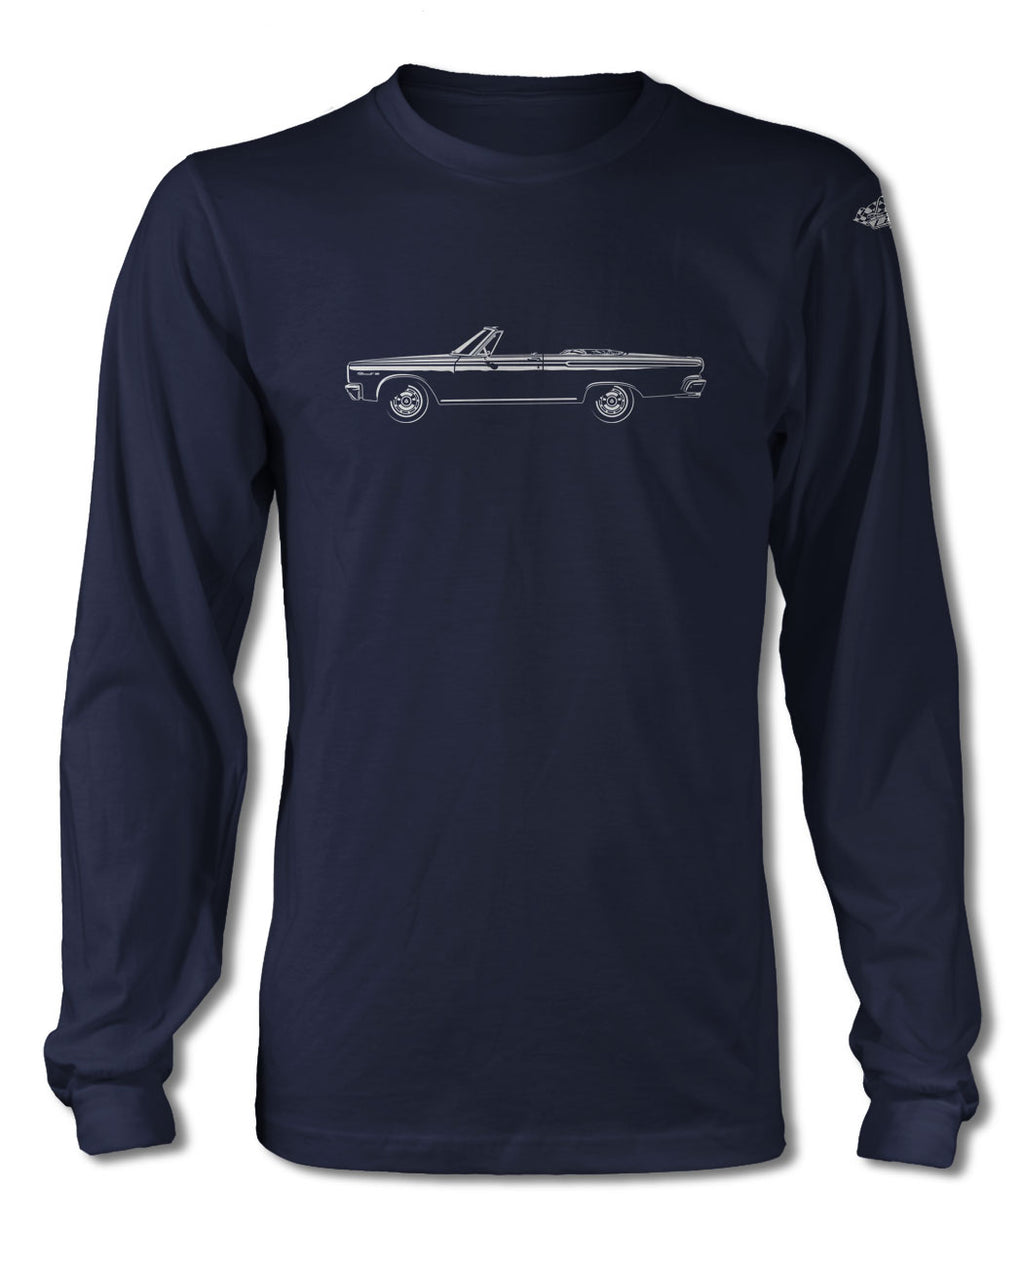 1965 Dodge Coronet 440 Convertible T-Shirt - Long Sleeves - Side View